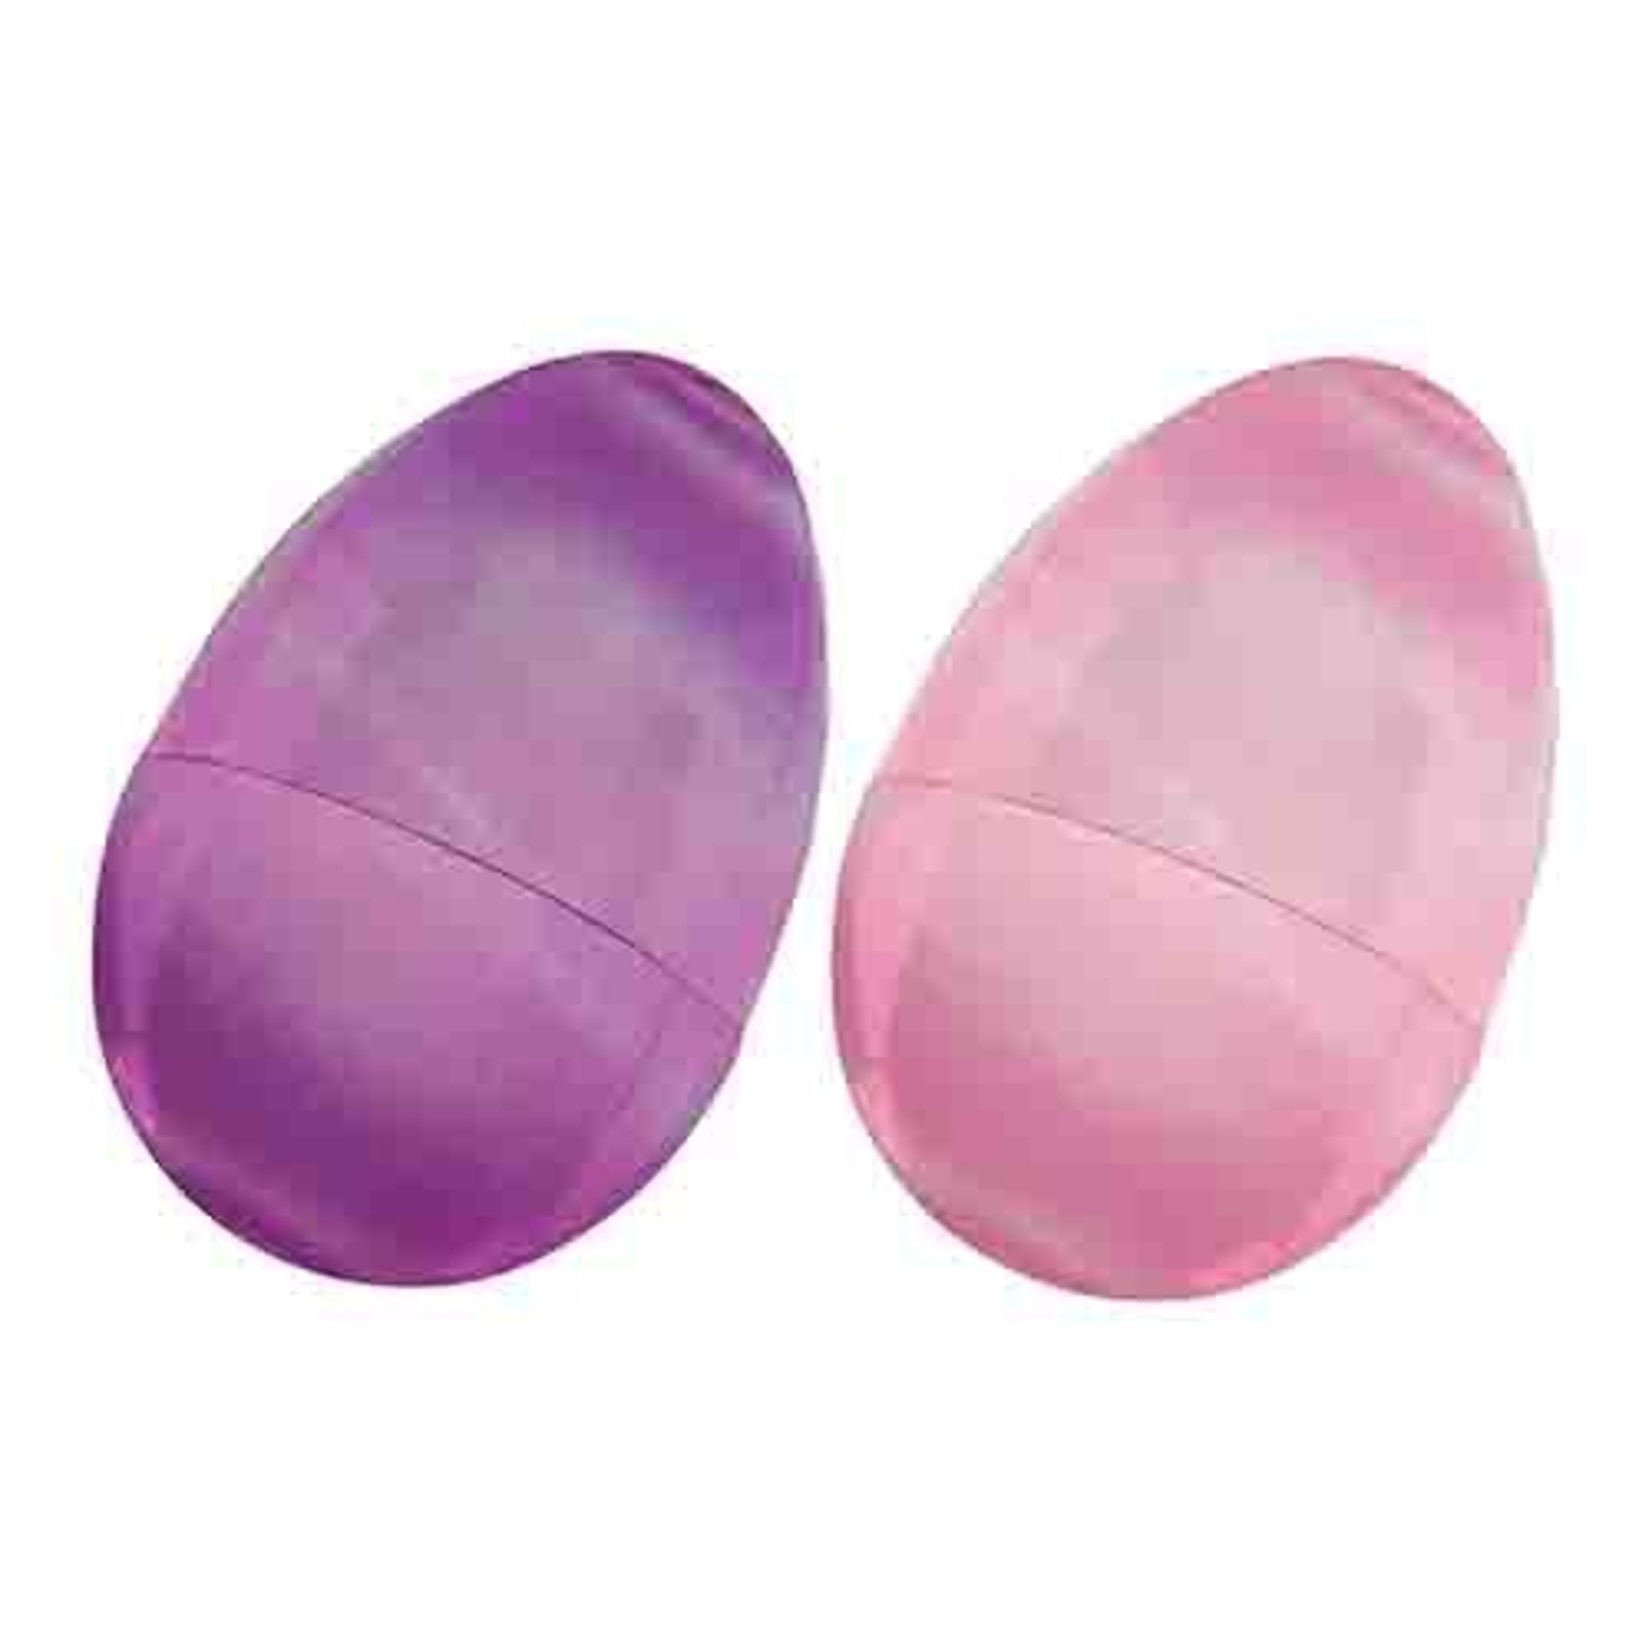 Amscan 3" Iridescent Fillable Easter Eggs - 6ct.